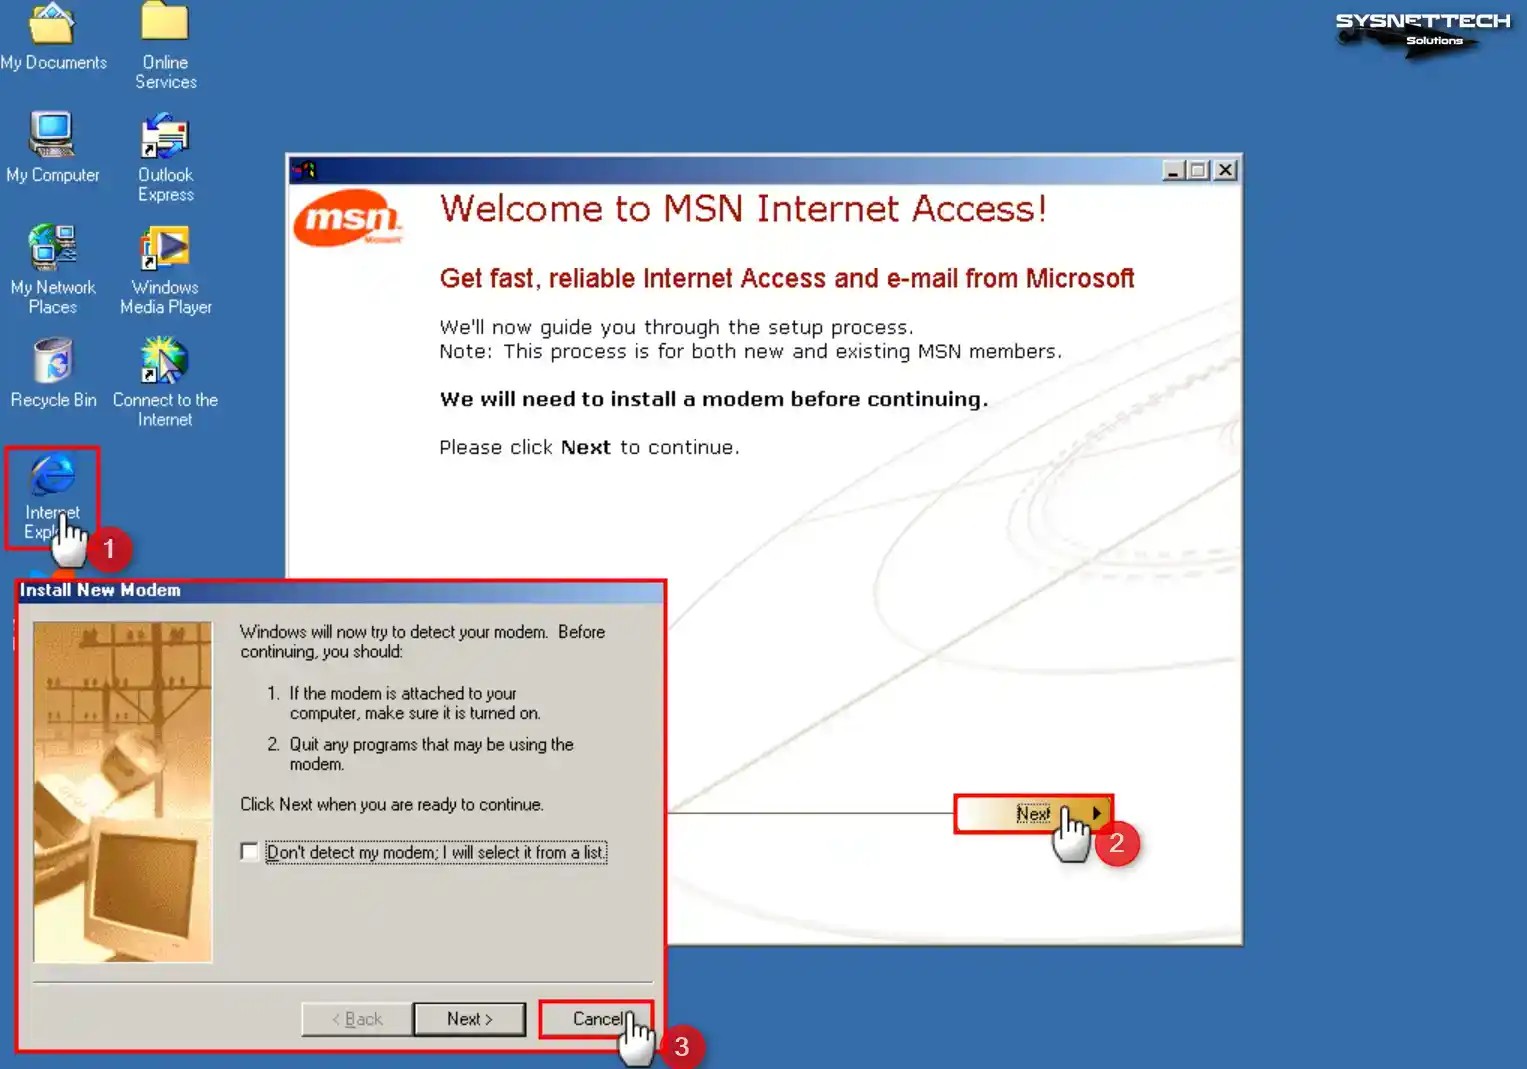 Welcome to MSN Internet Access